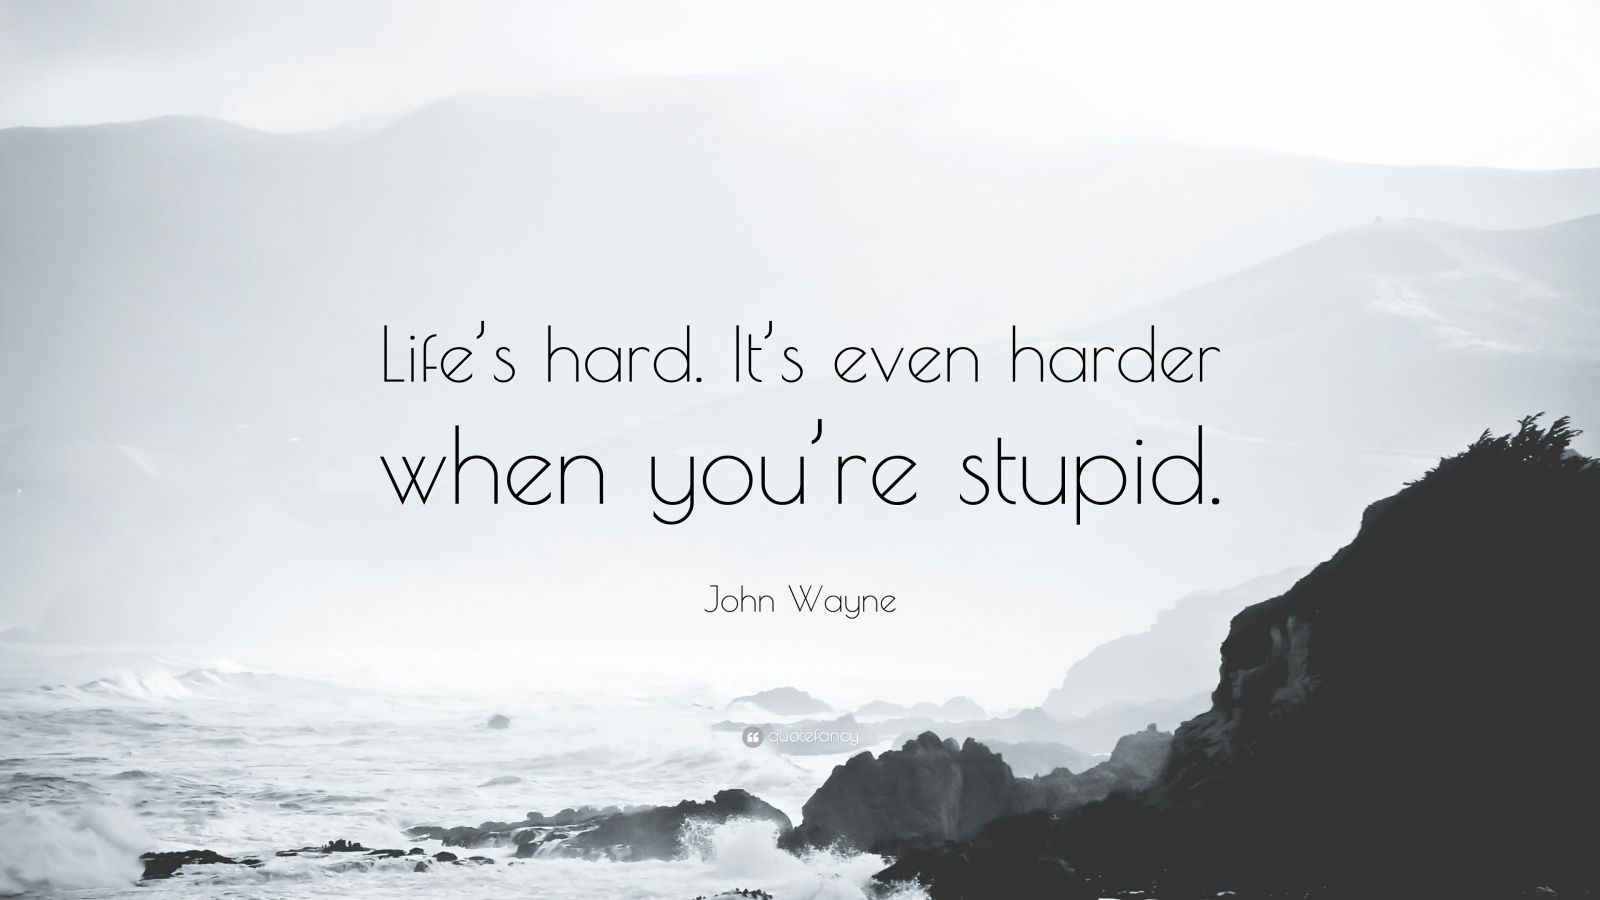 4093 John Wayne Quote Life s hard It s even harder when you re stupid